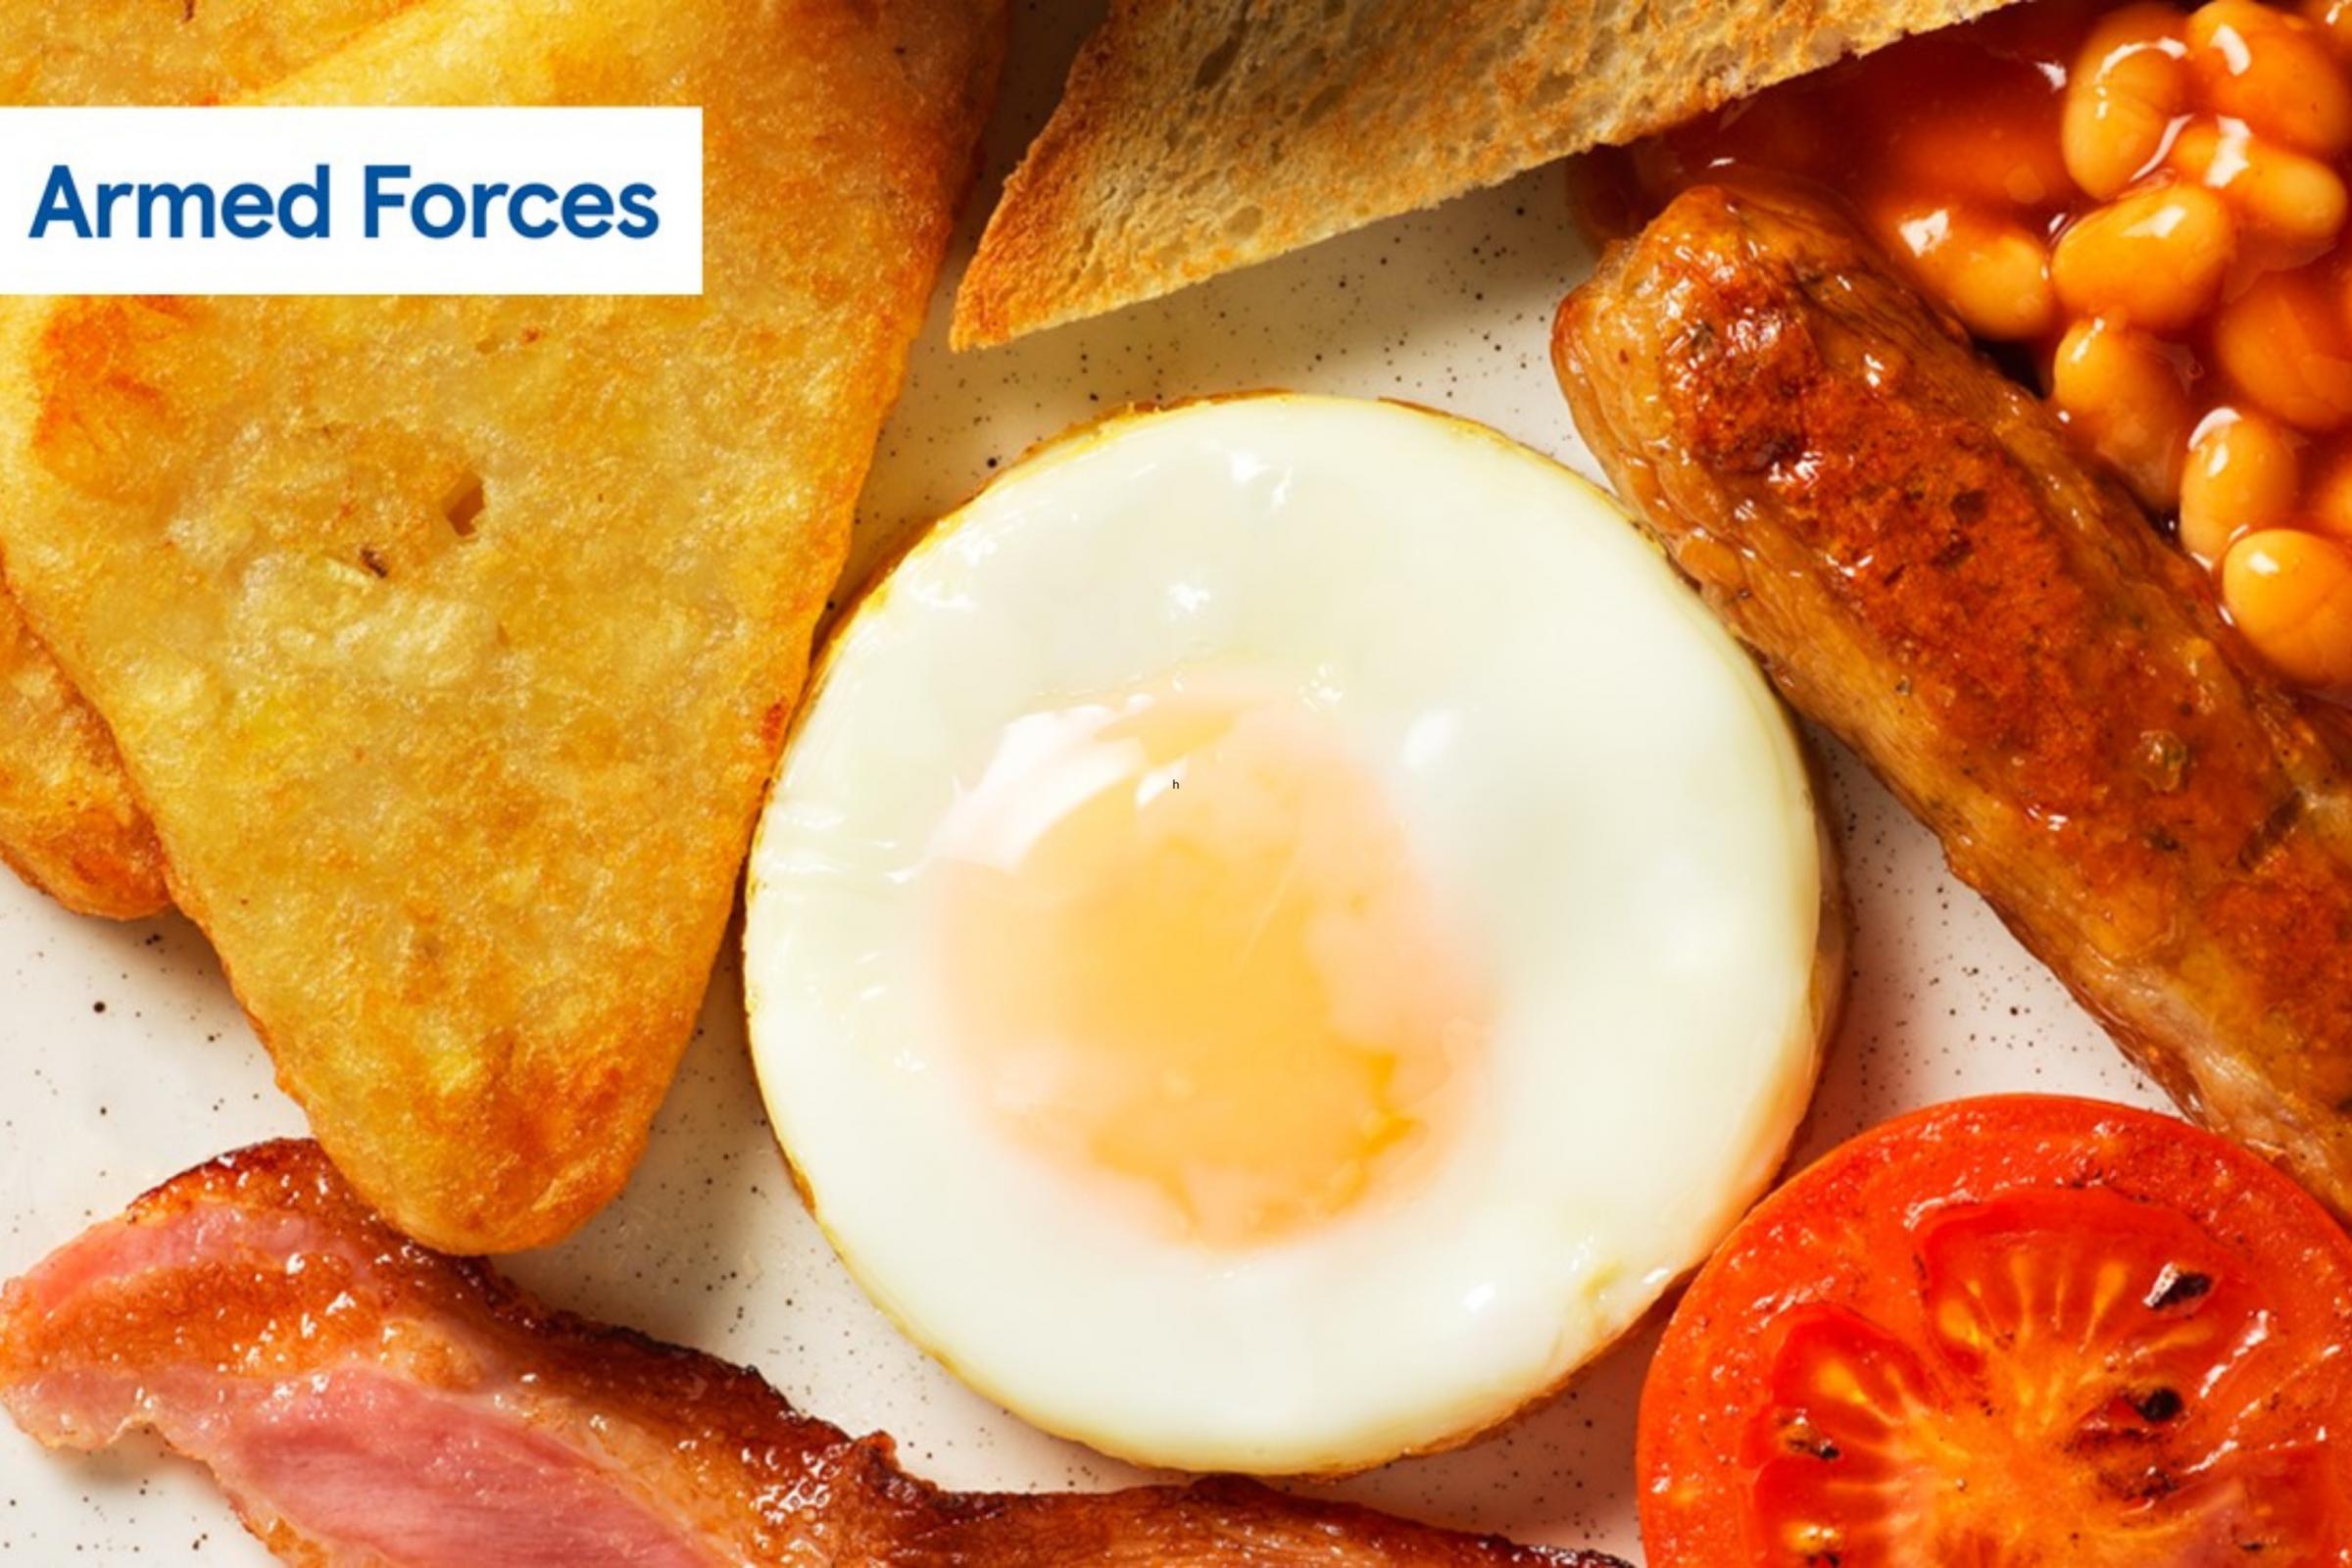 Armed Forces members get free breakfast at Tesco stores in Glasgow